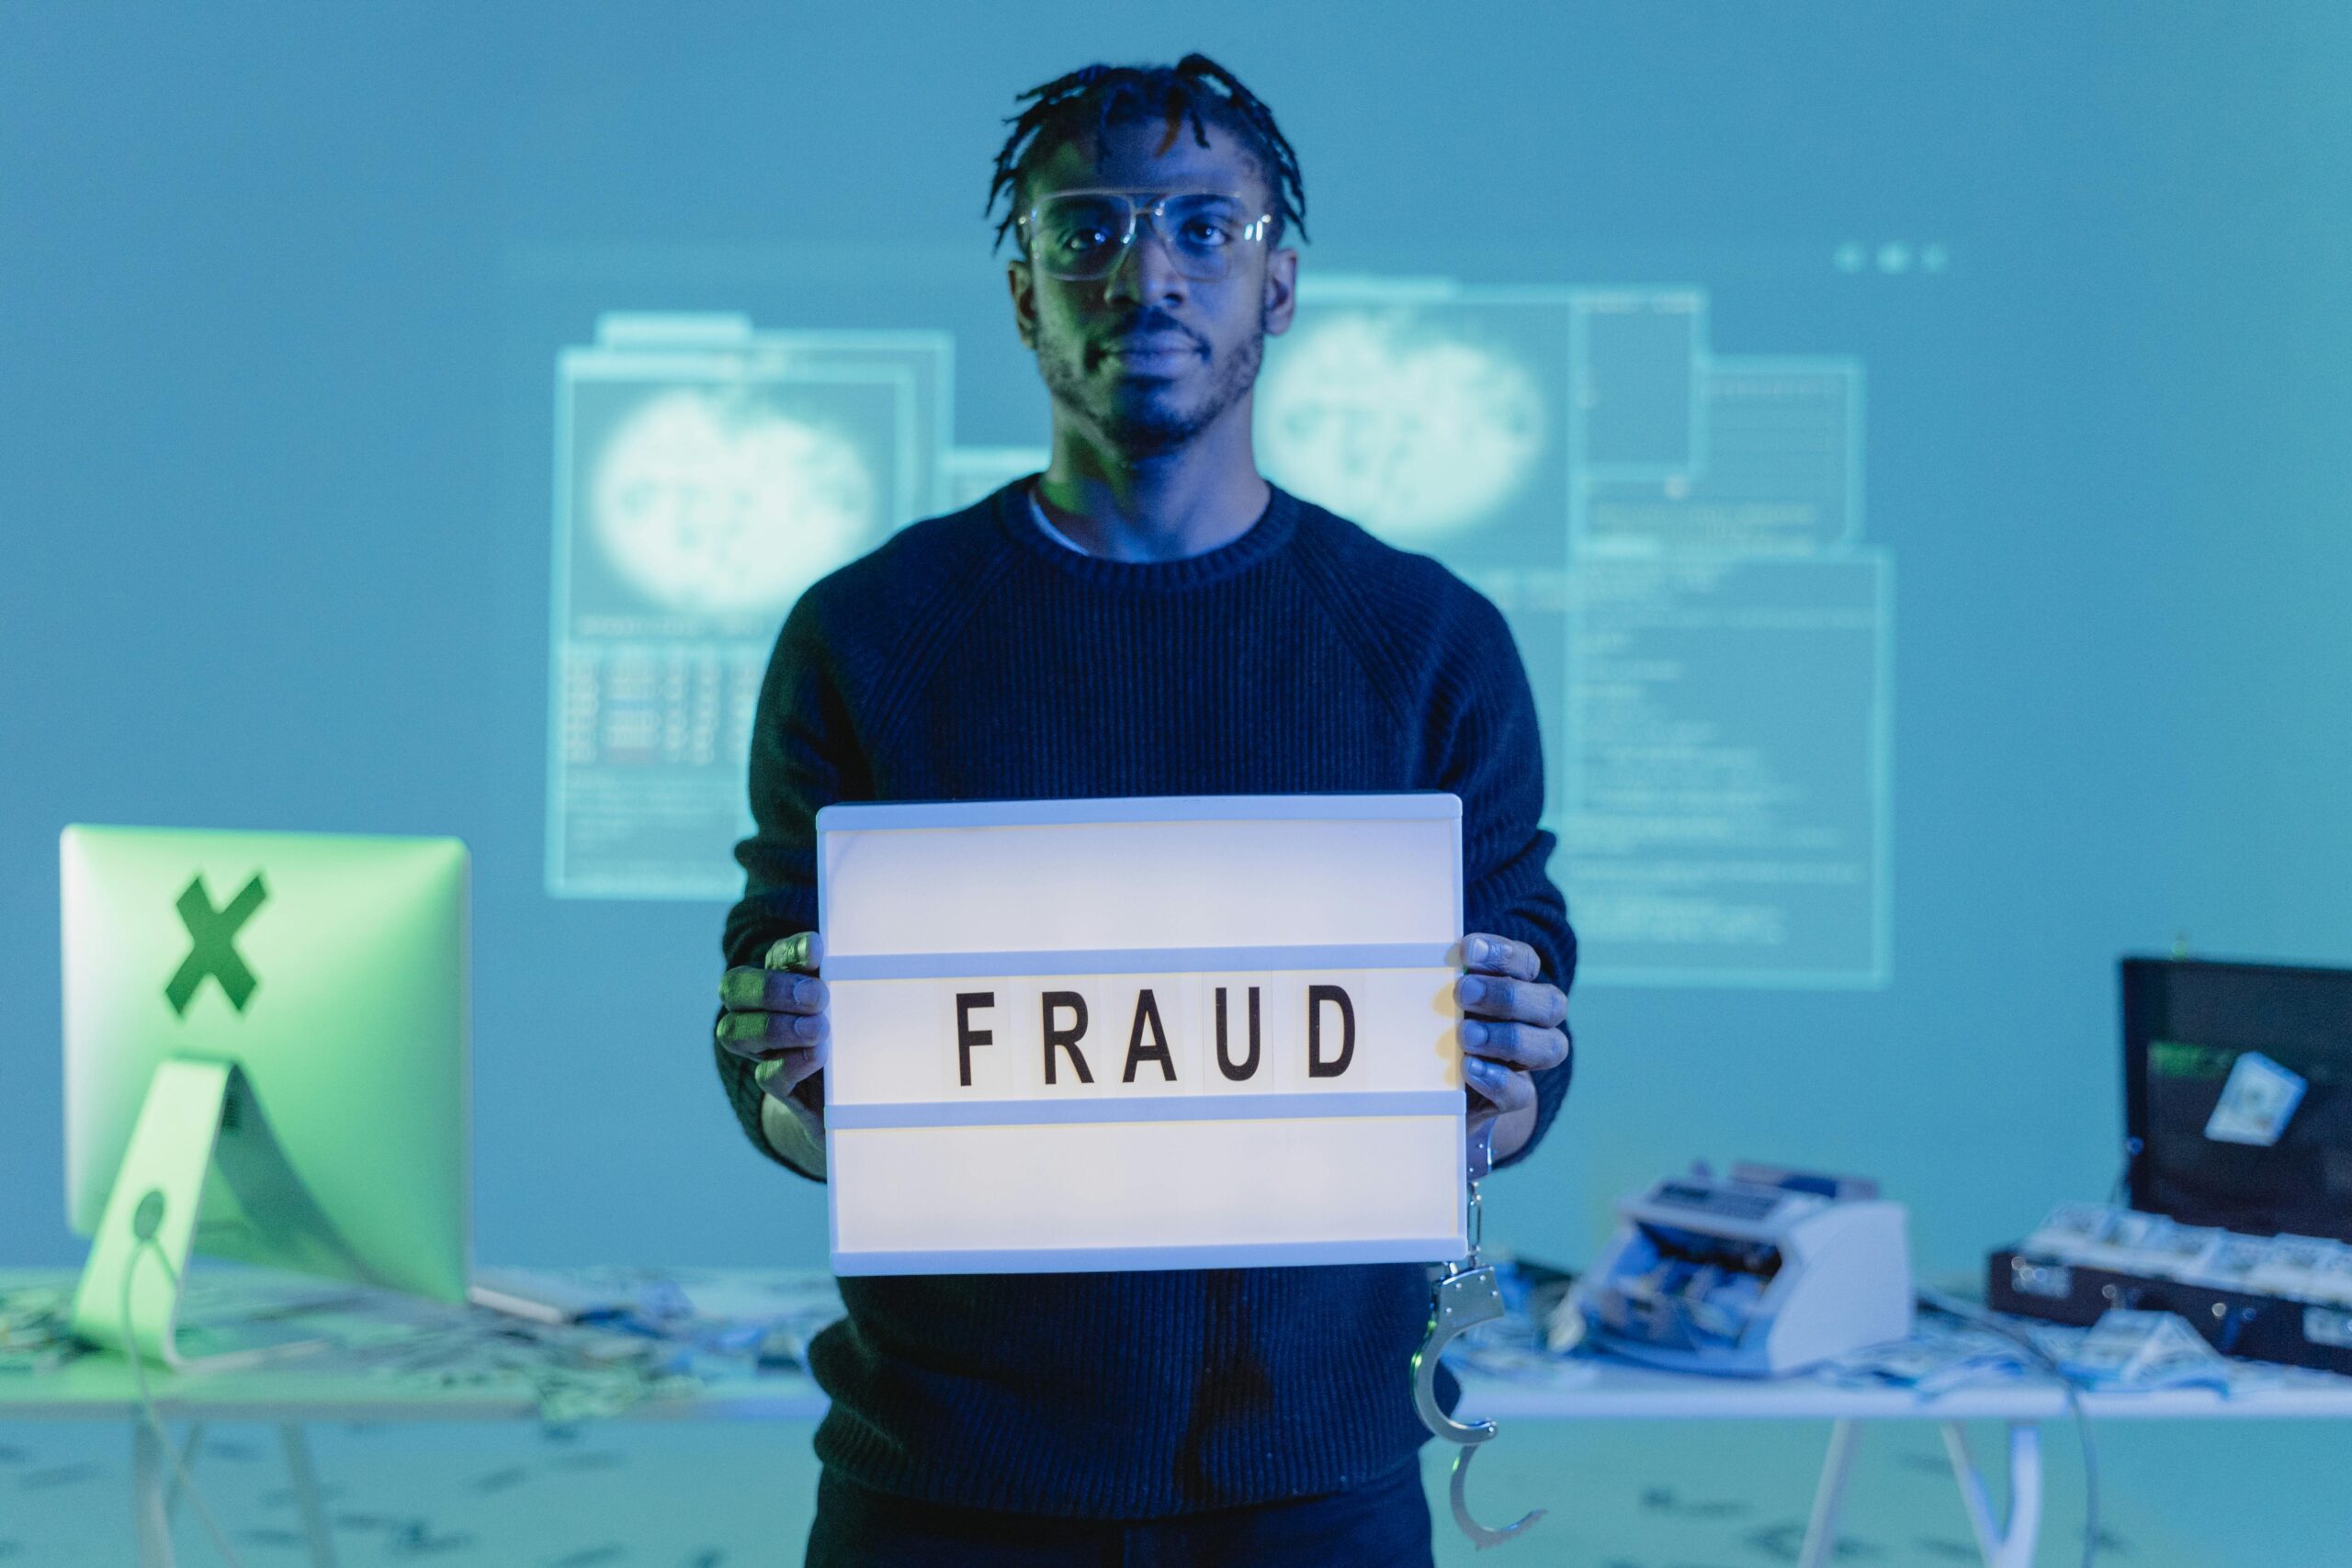 A man in a room with computers holds a fraud notice in his hands